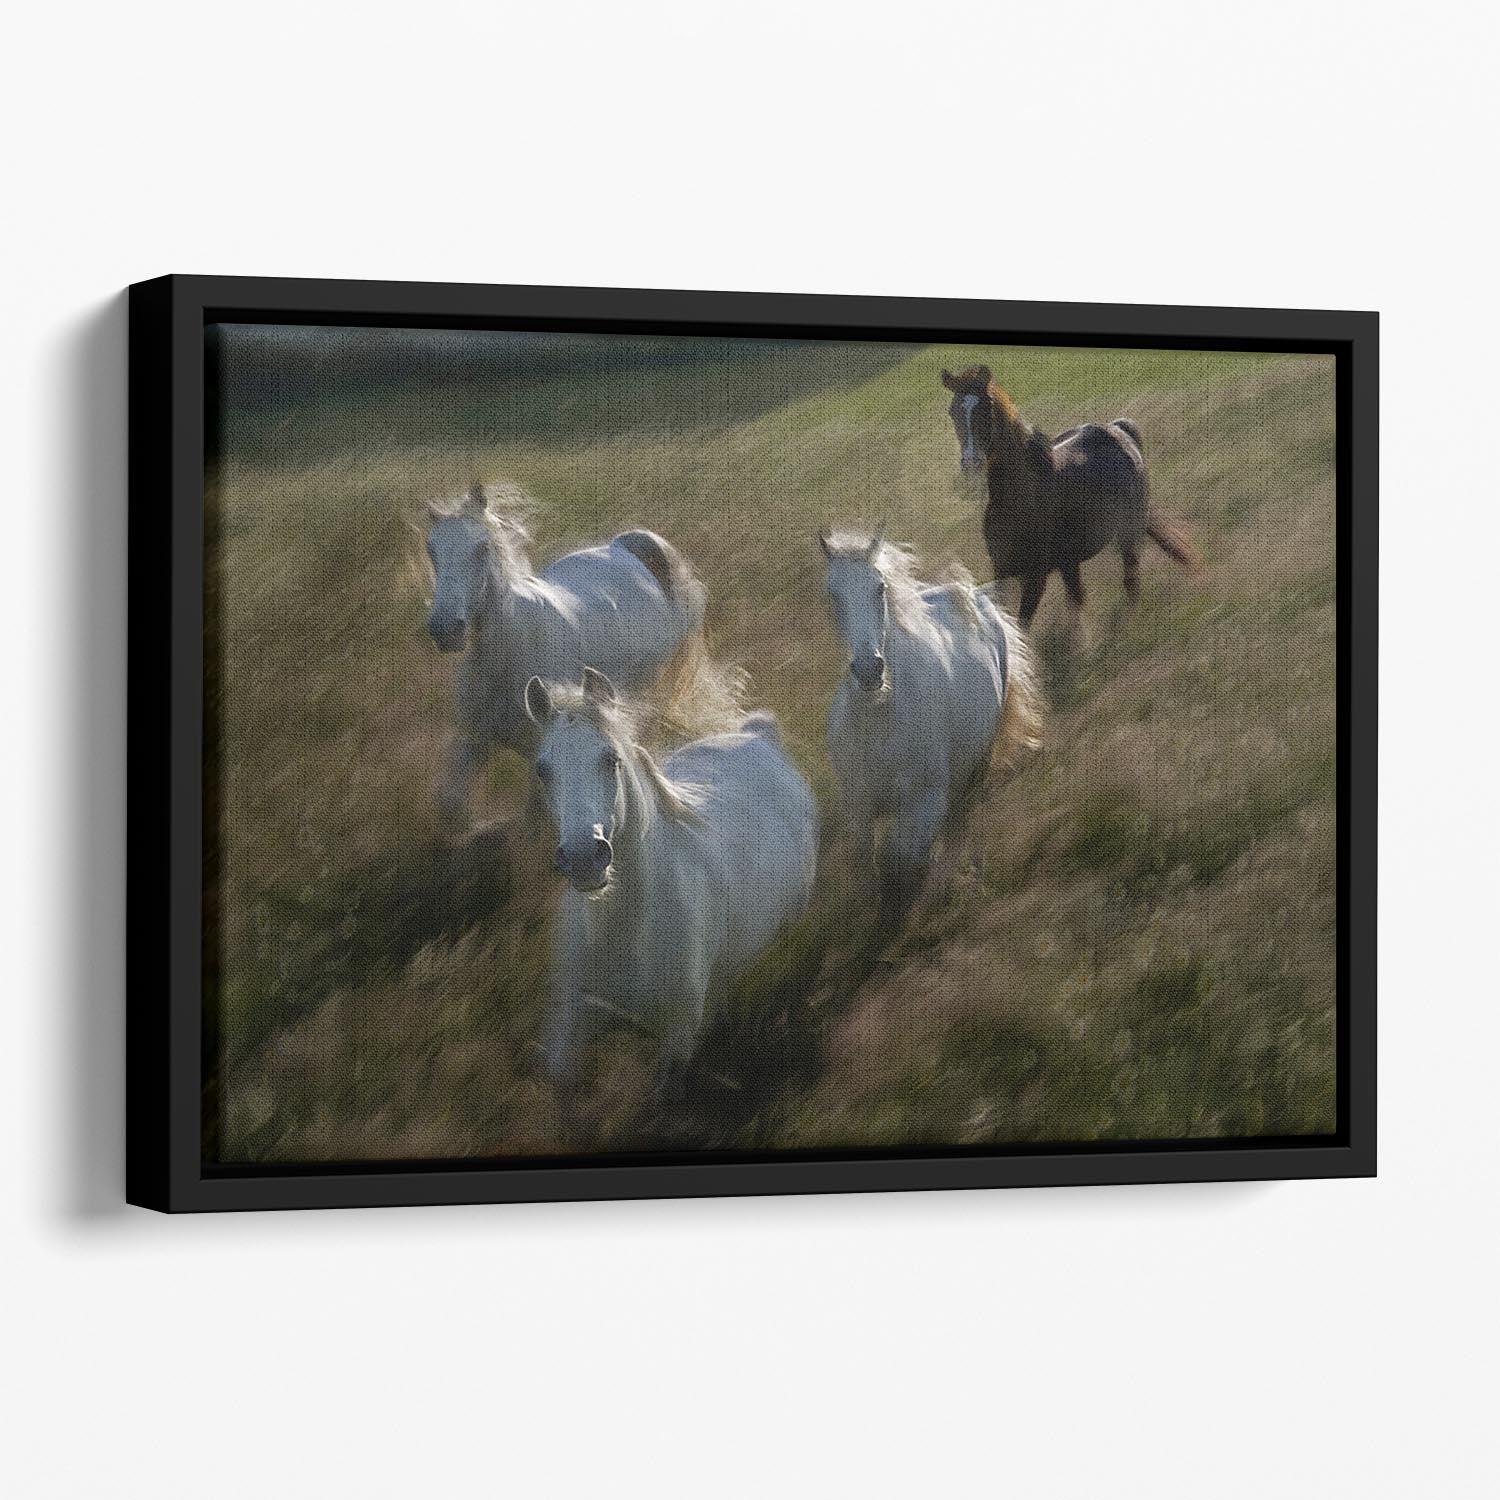 Horses Gallop in Floating Framed Canvas - Canvas Art Rocks - 1